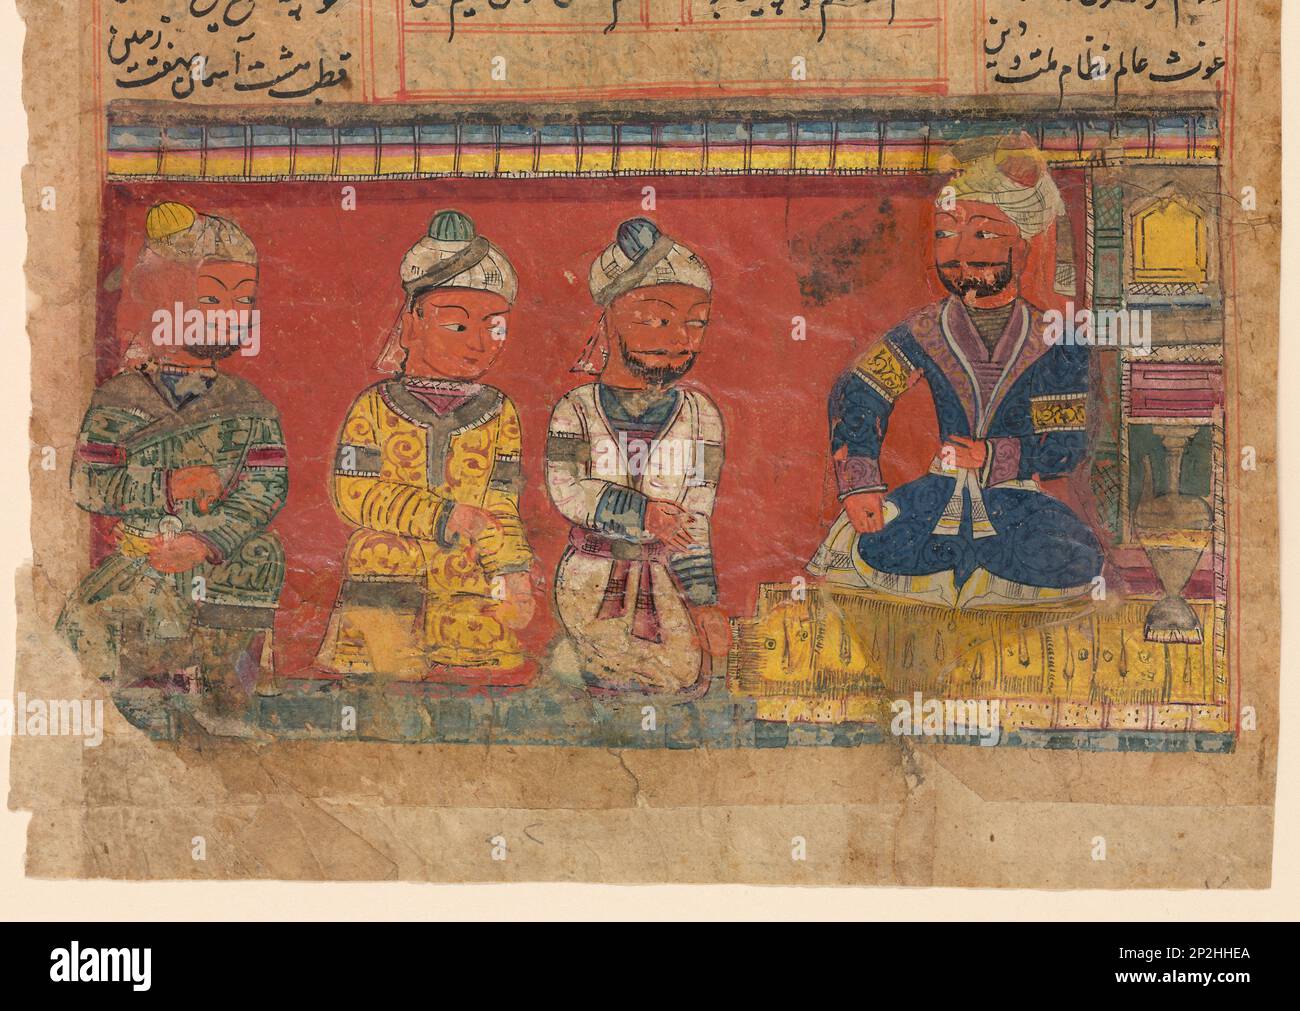 Nizamuddin Awliya with three attendants. From a Khamsa (Quintet) by Amir Khusraw Dihlavi, c. 1450. Found in the collection of the Smithsonian National Museum. Stock Photo